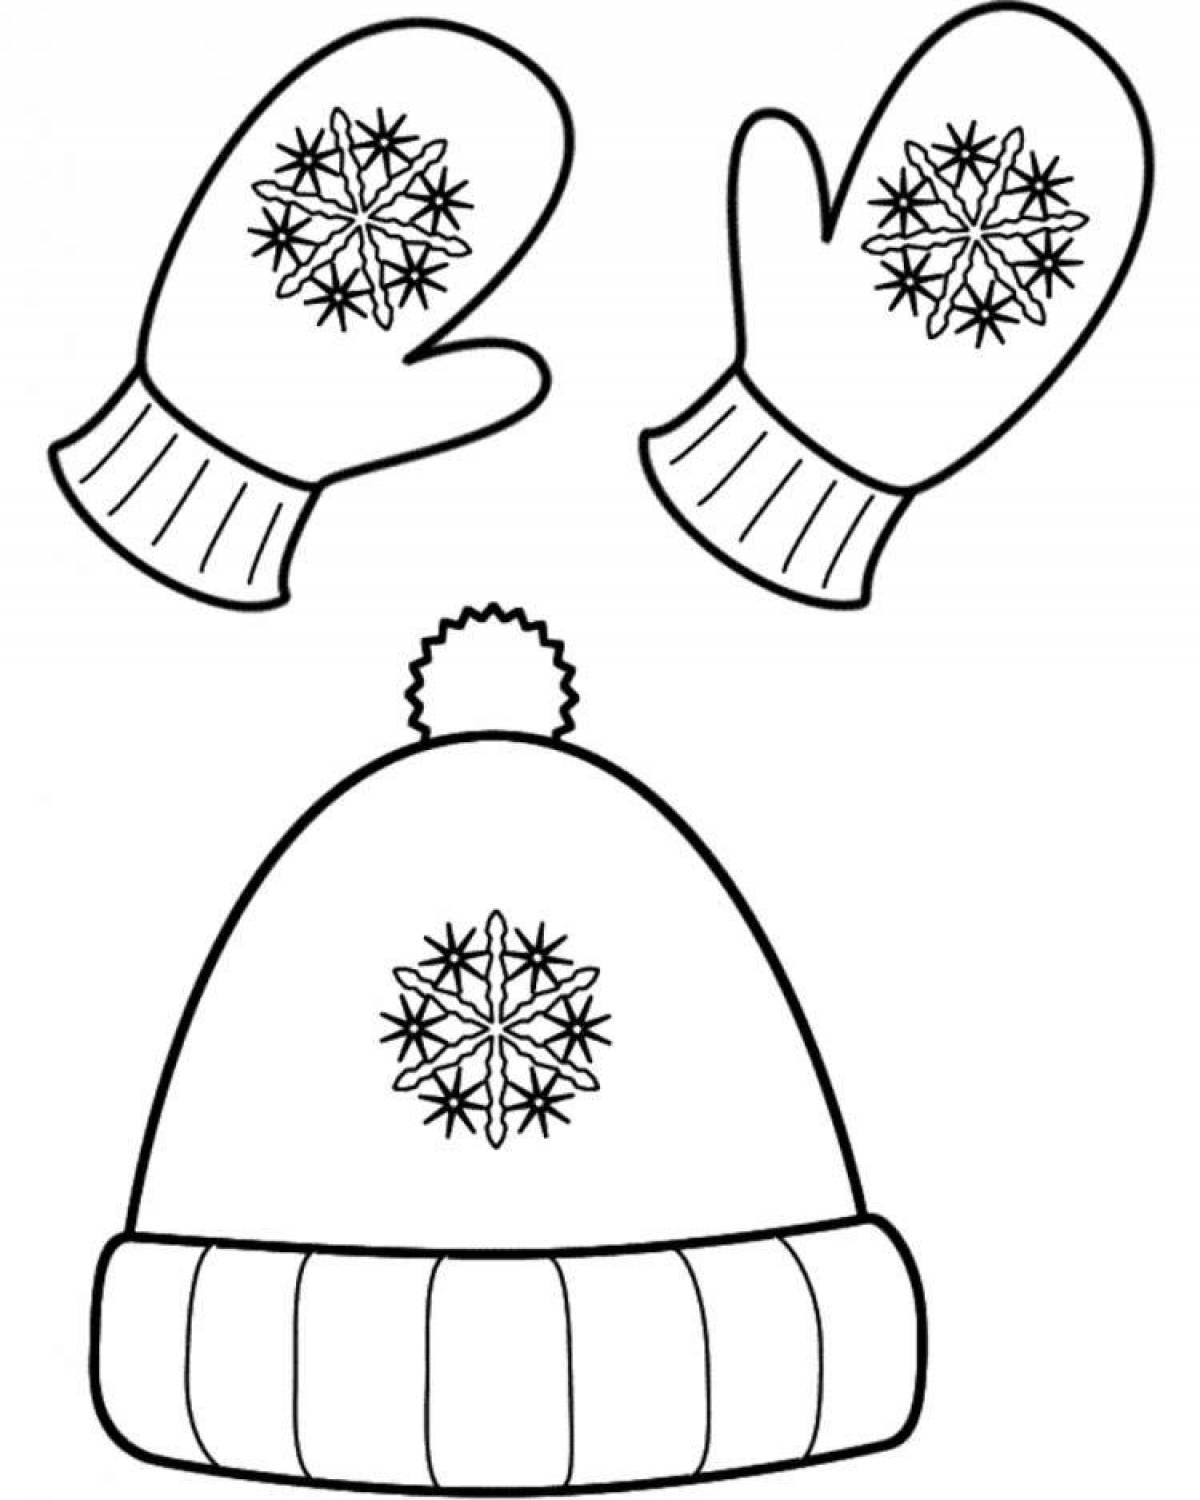 Coloring book with a shiny hat and scarf for schoolchildren